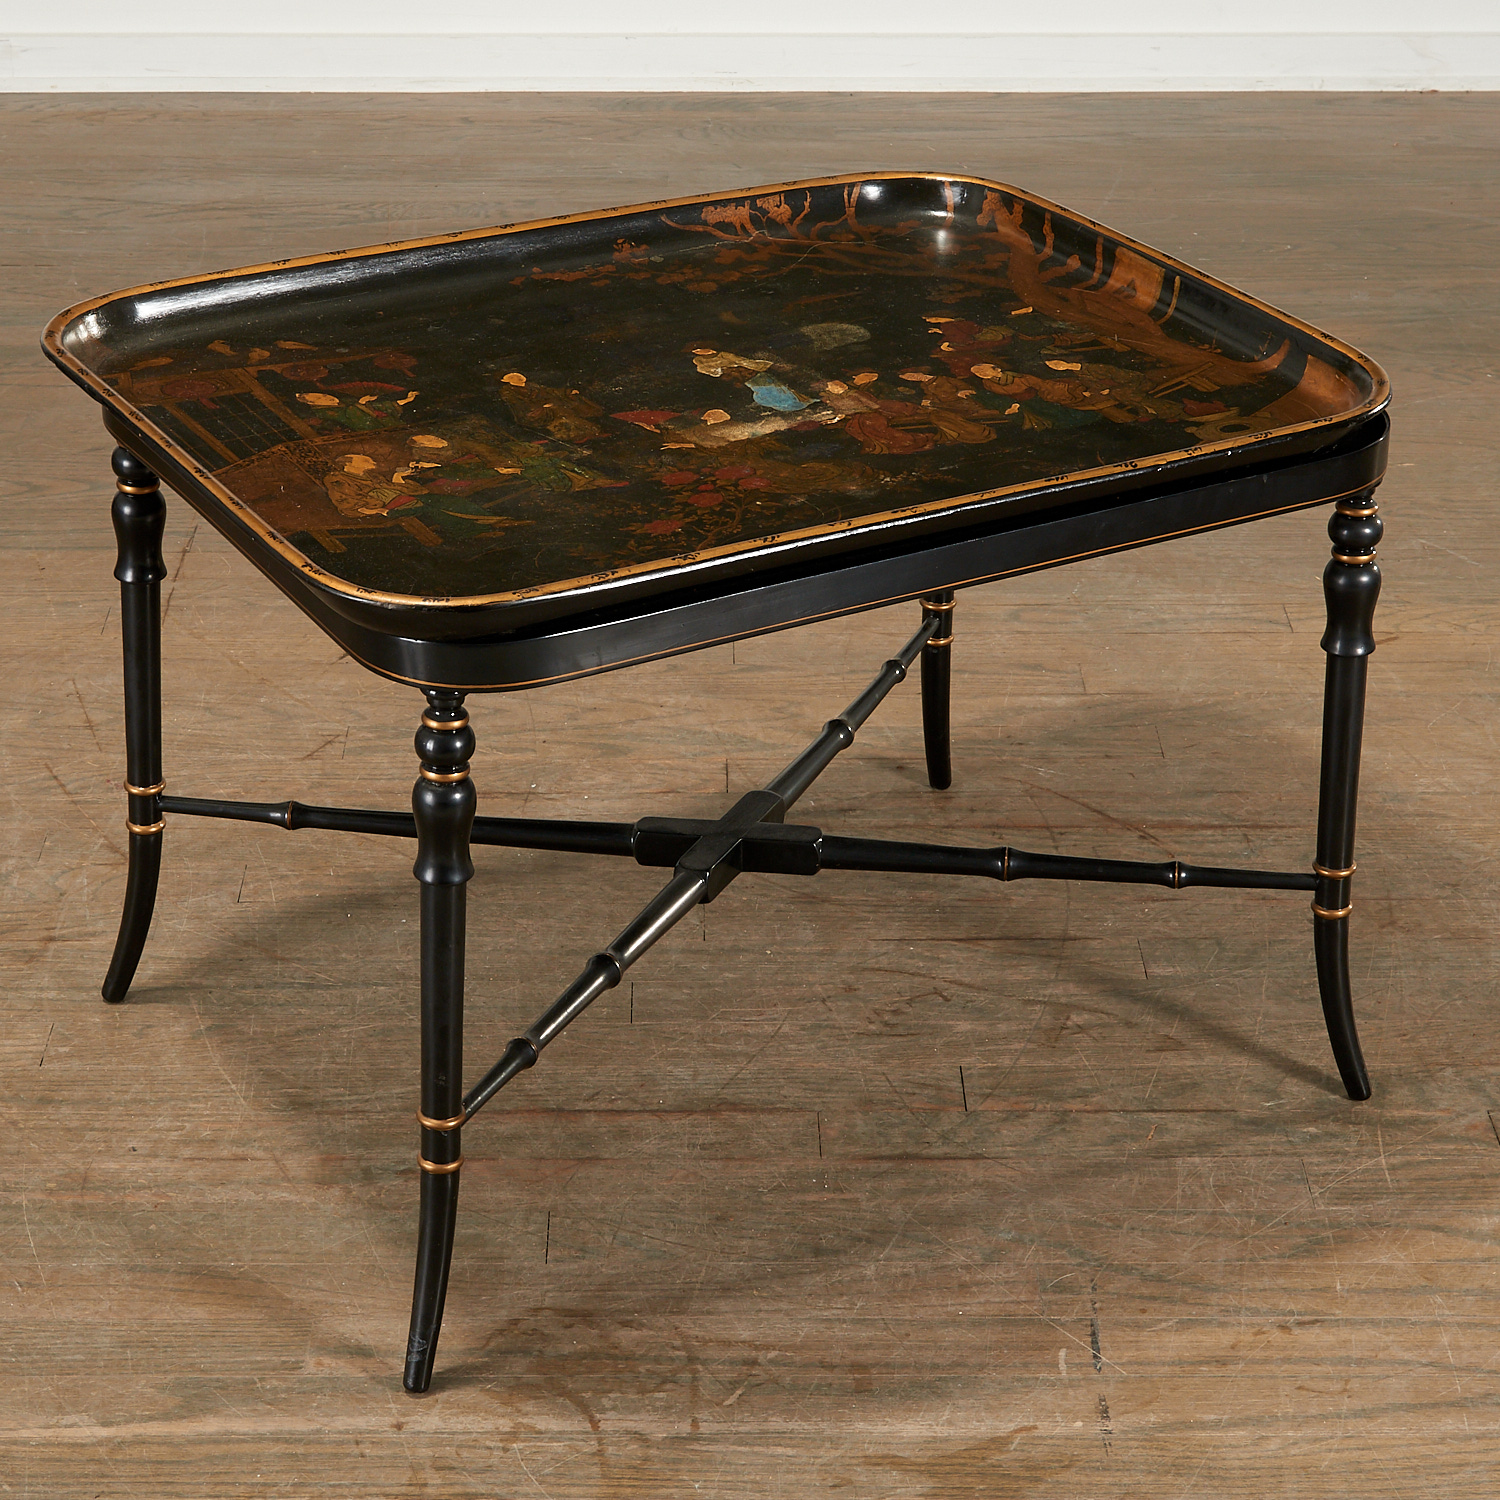 VICTORIAN CHINOISERIE LACQUER TRAY 3624dd